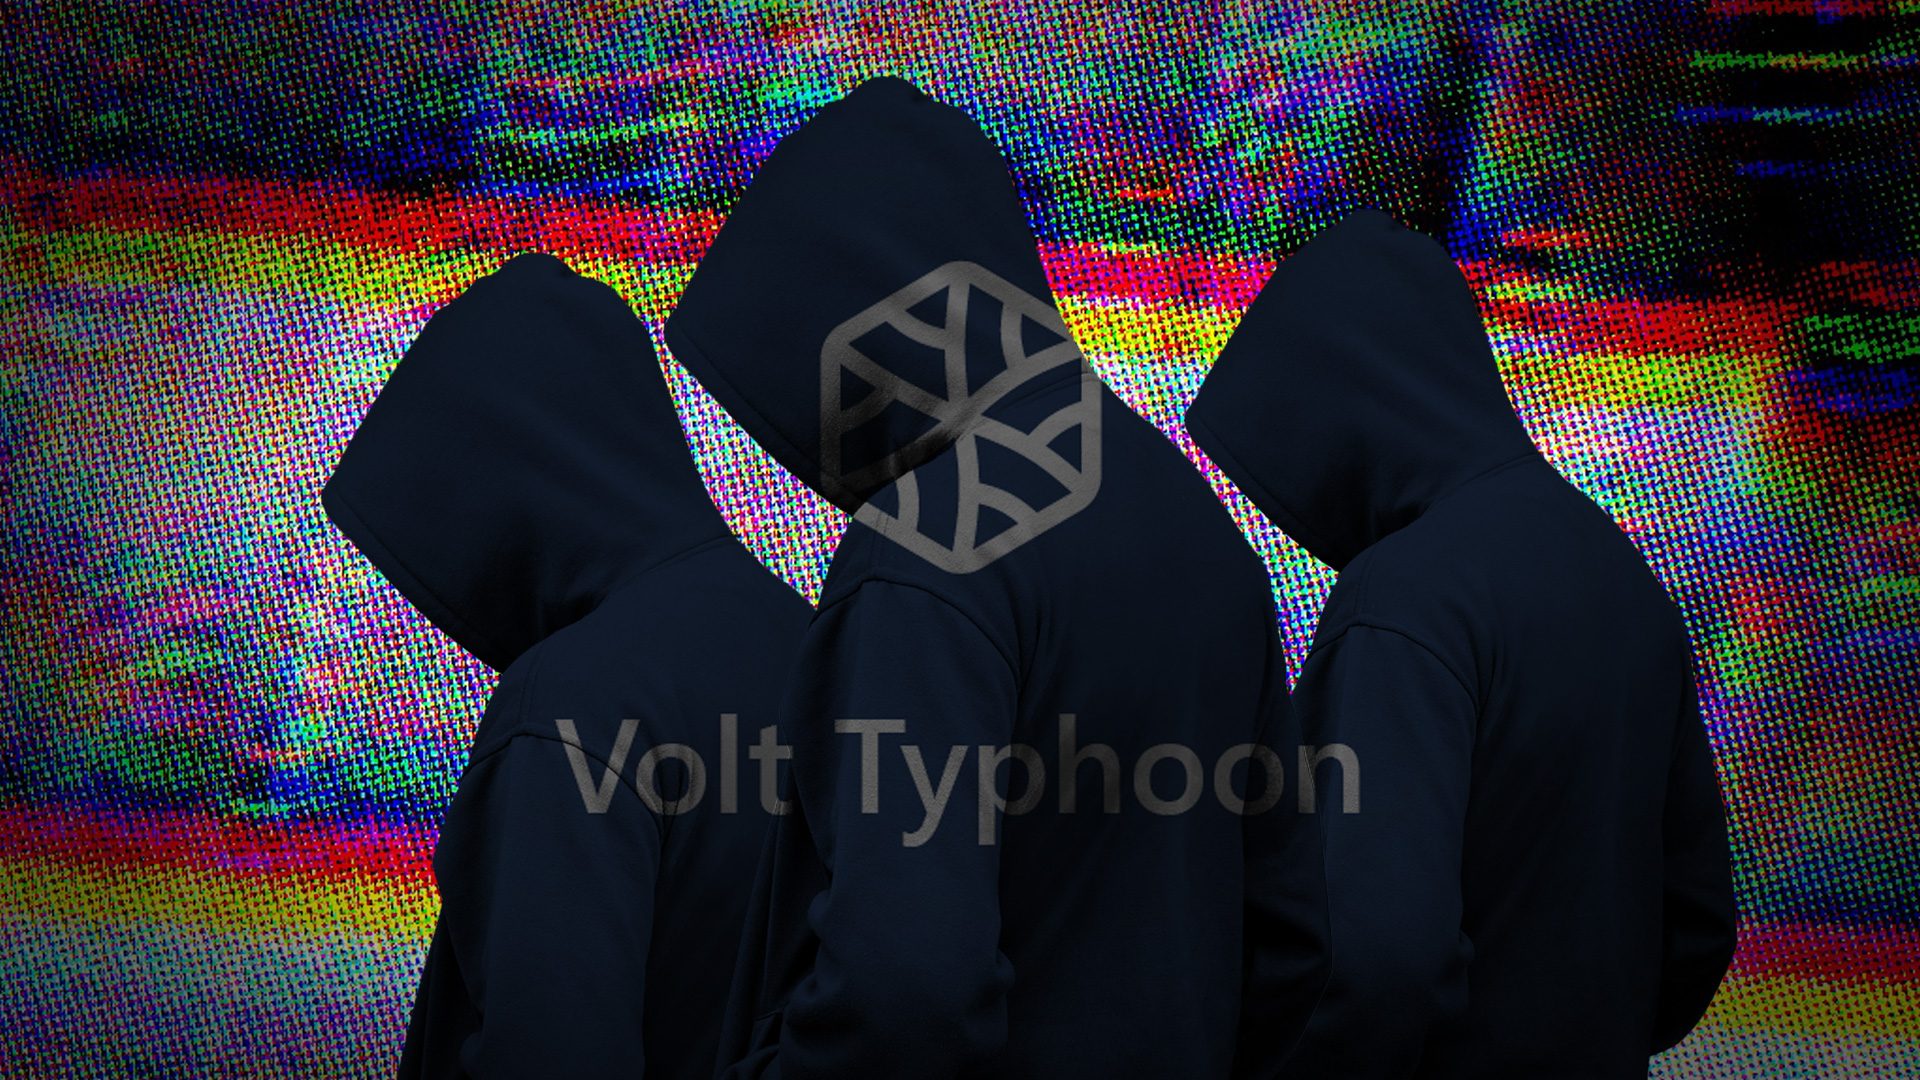 What is Volt Typhoon, the alleged China-backed hacking group?